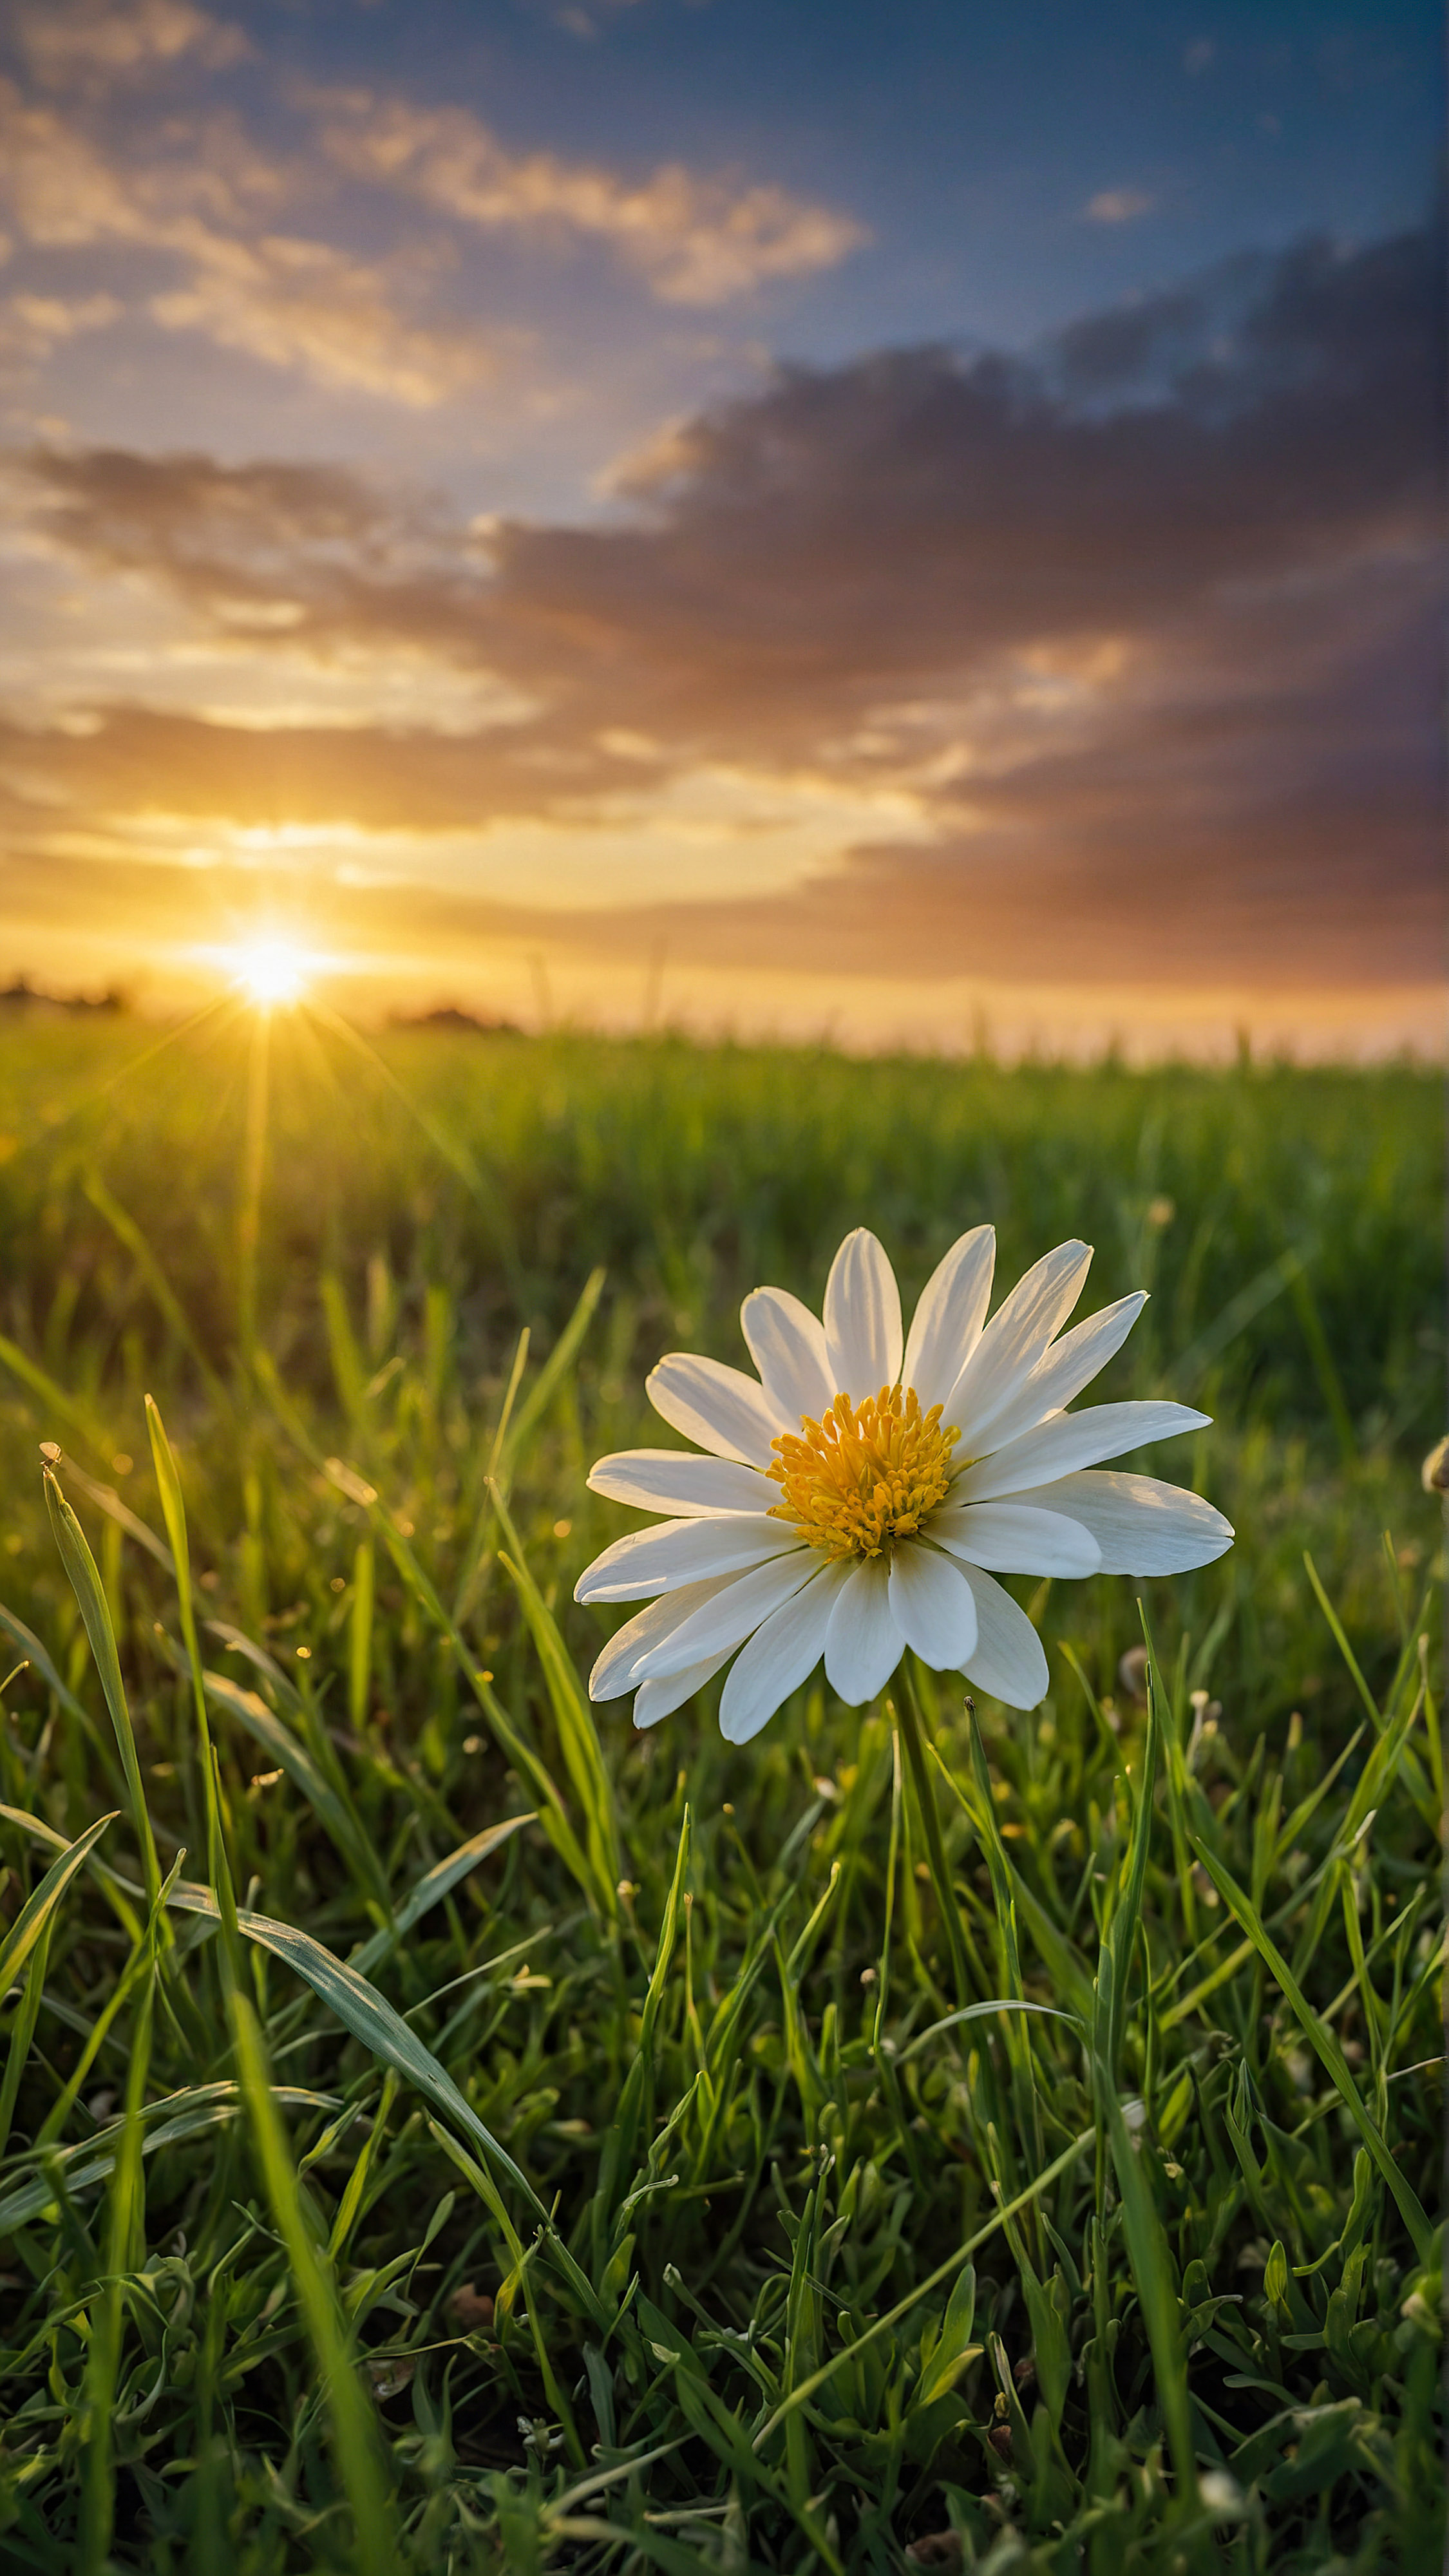 Capture the essence of nature with our cute iPhone background, featuring a single white flower with yellow stamens blossoming amidst green grass, set against a backdrop of a vibrant sunset.